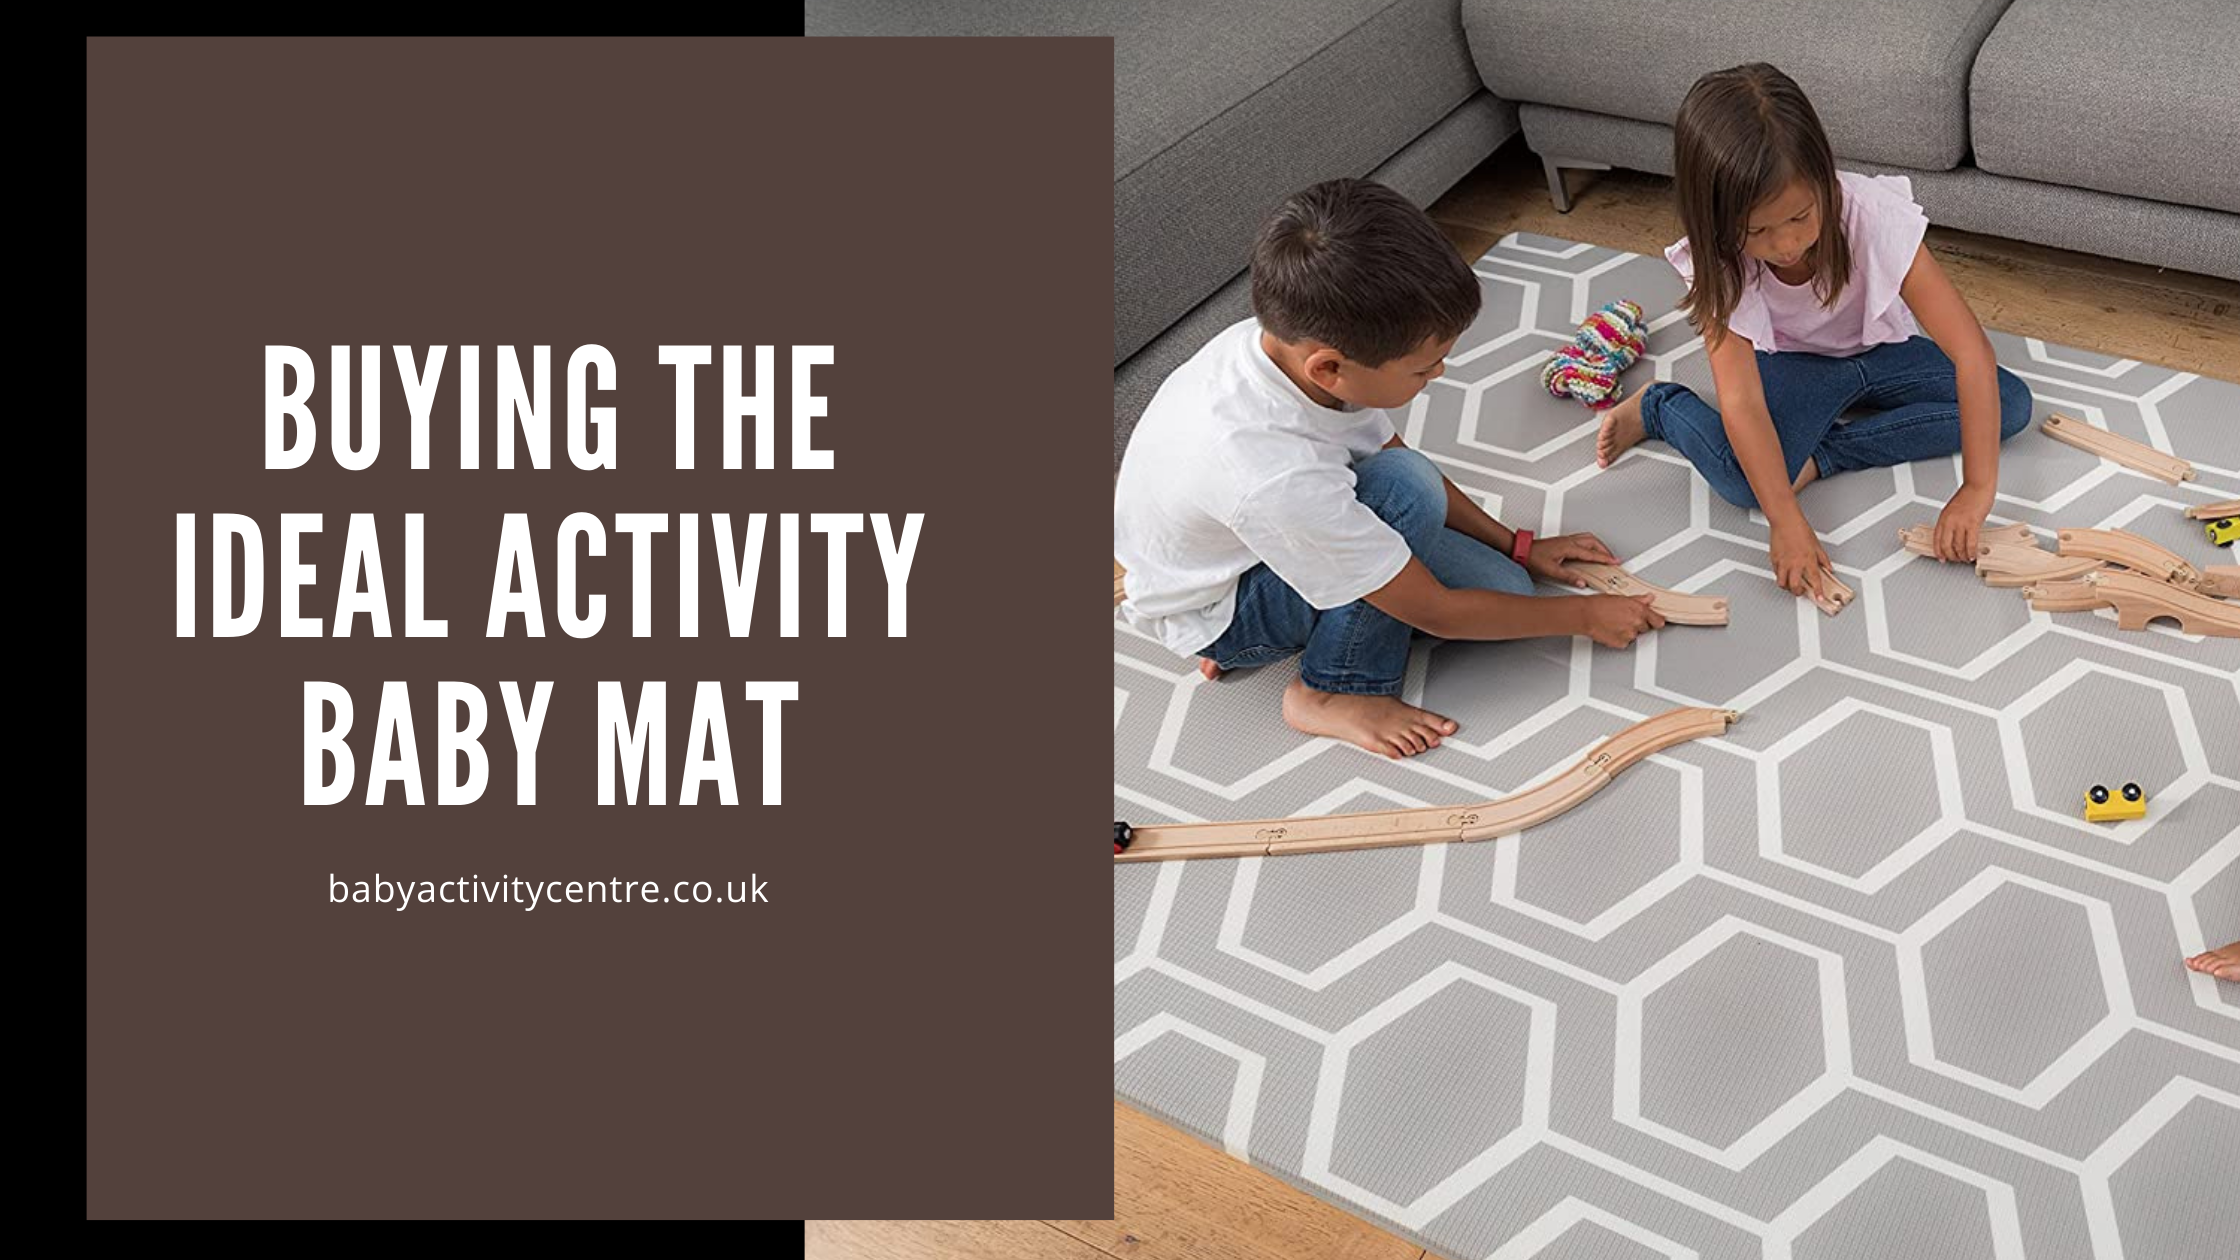 Buying the ideal activity baby mat